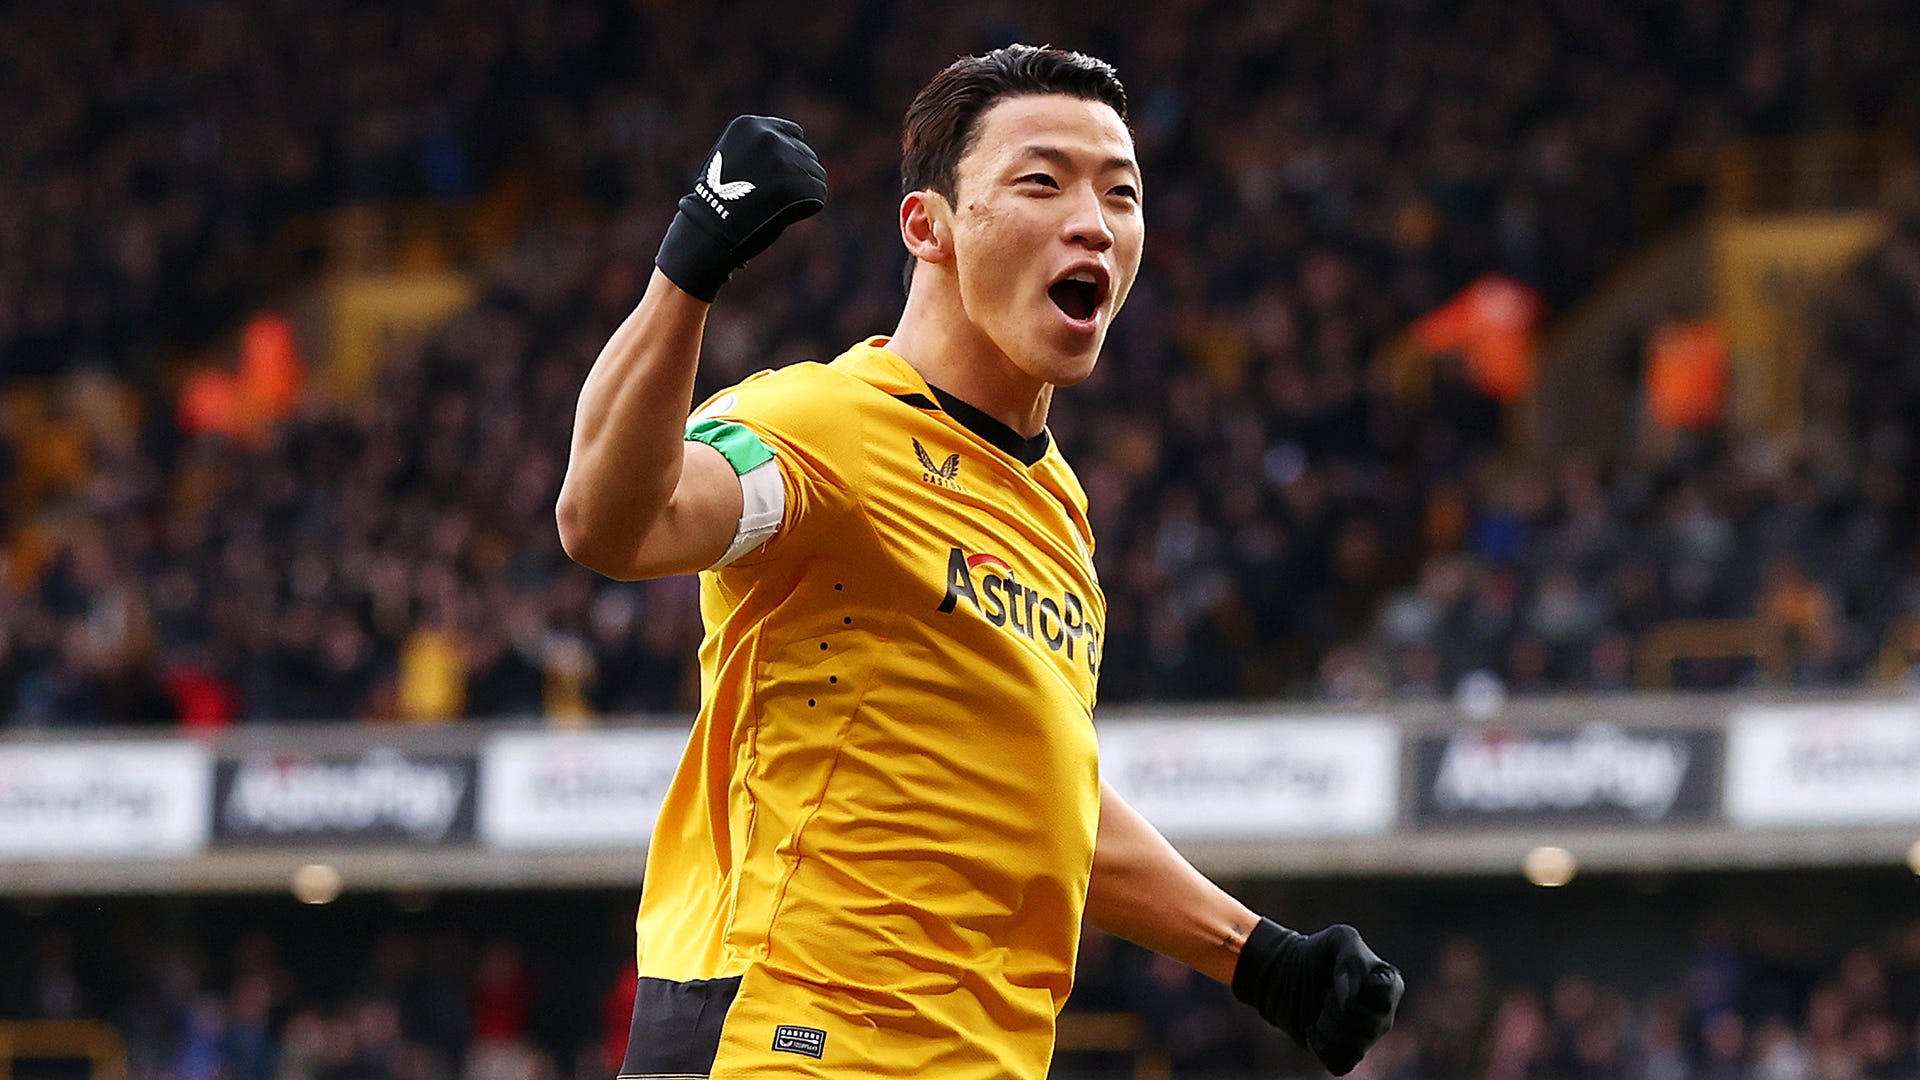 Wolves admin brutally trolls Man City boss Pep Guardiola for forgetting Hwang Hee-chans name as they post hilarious Twitter update after shock winning goal Goal US